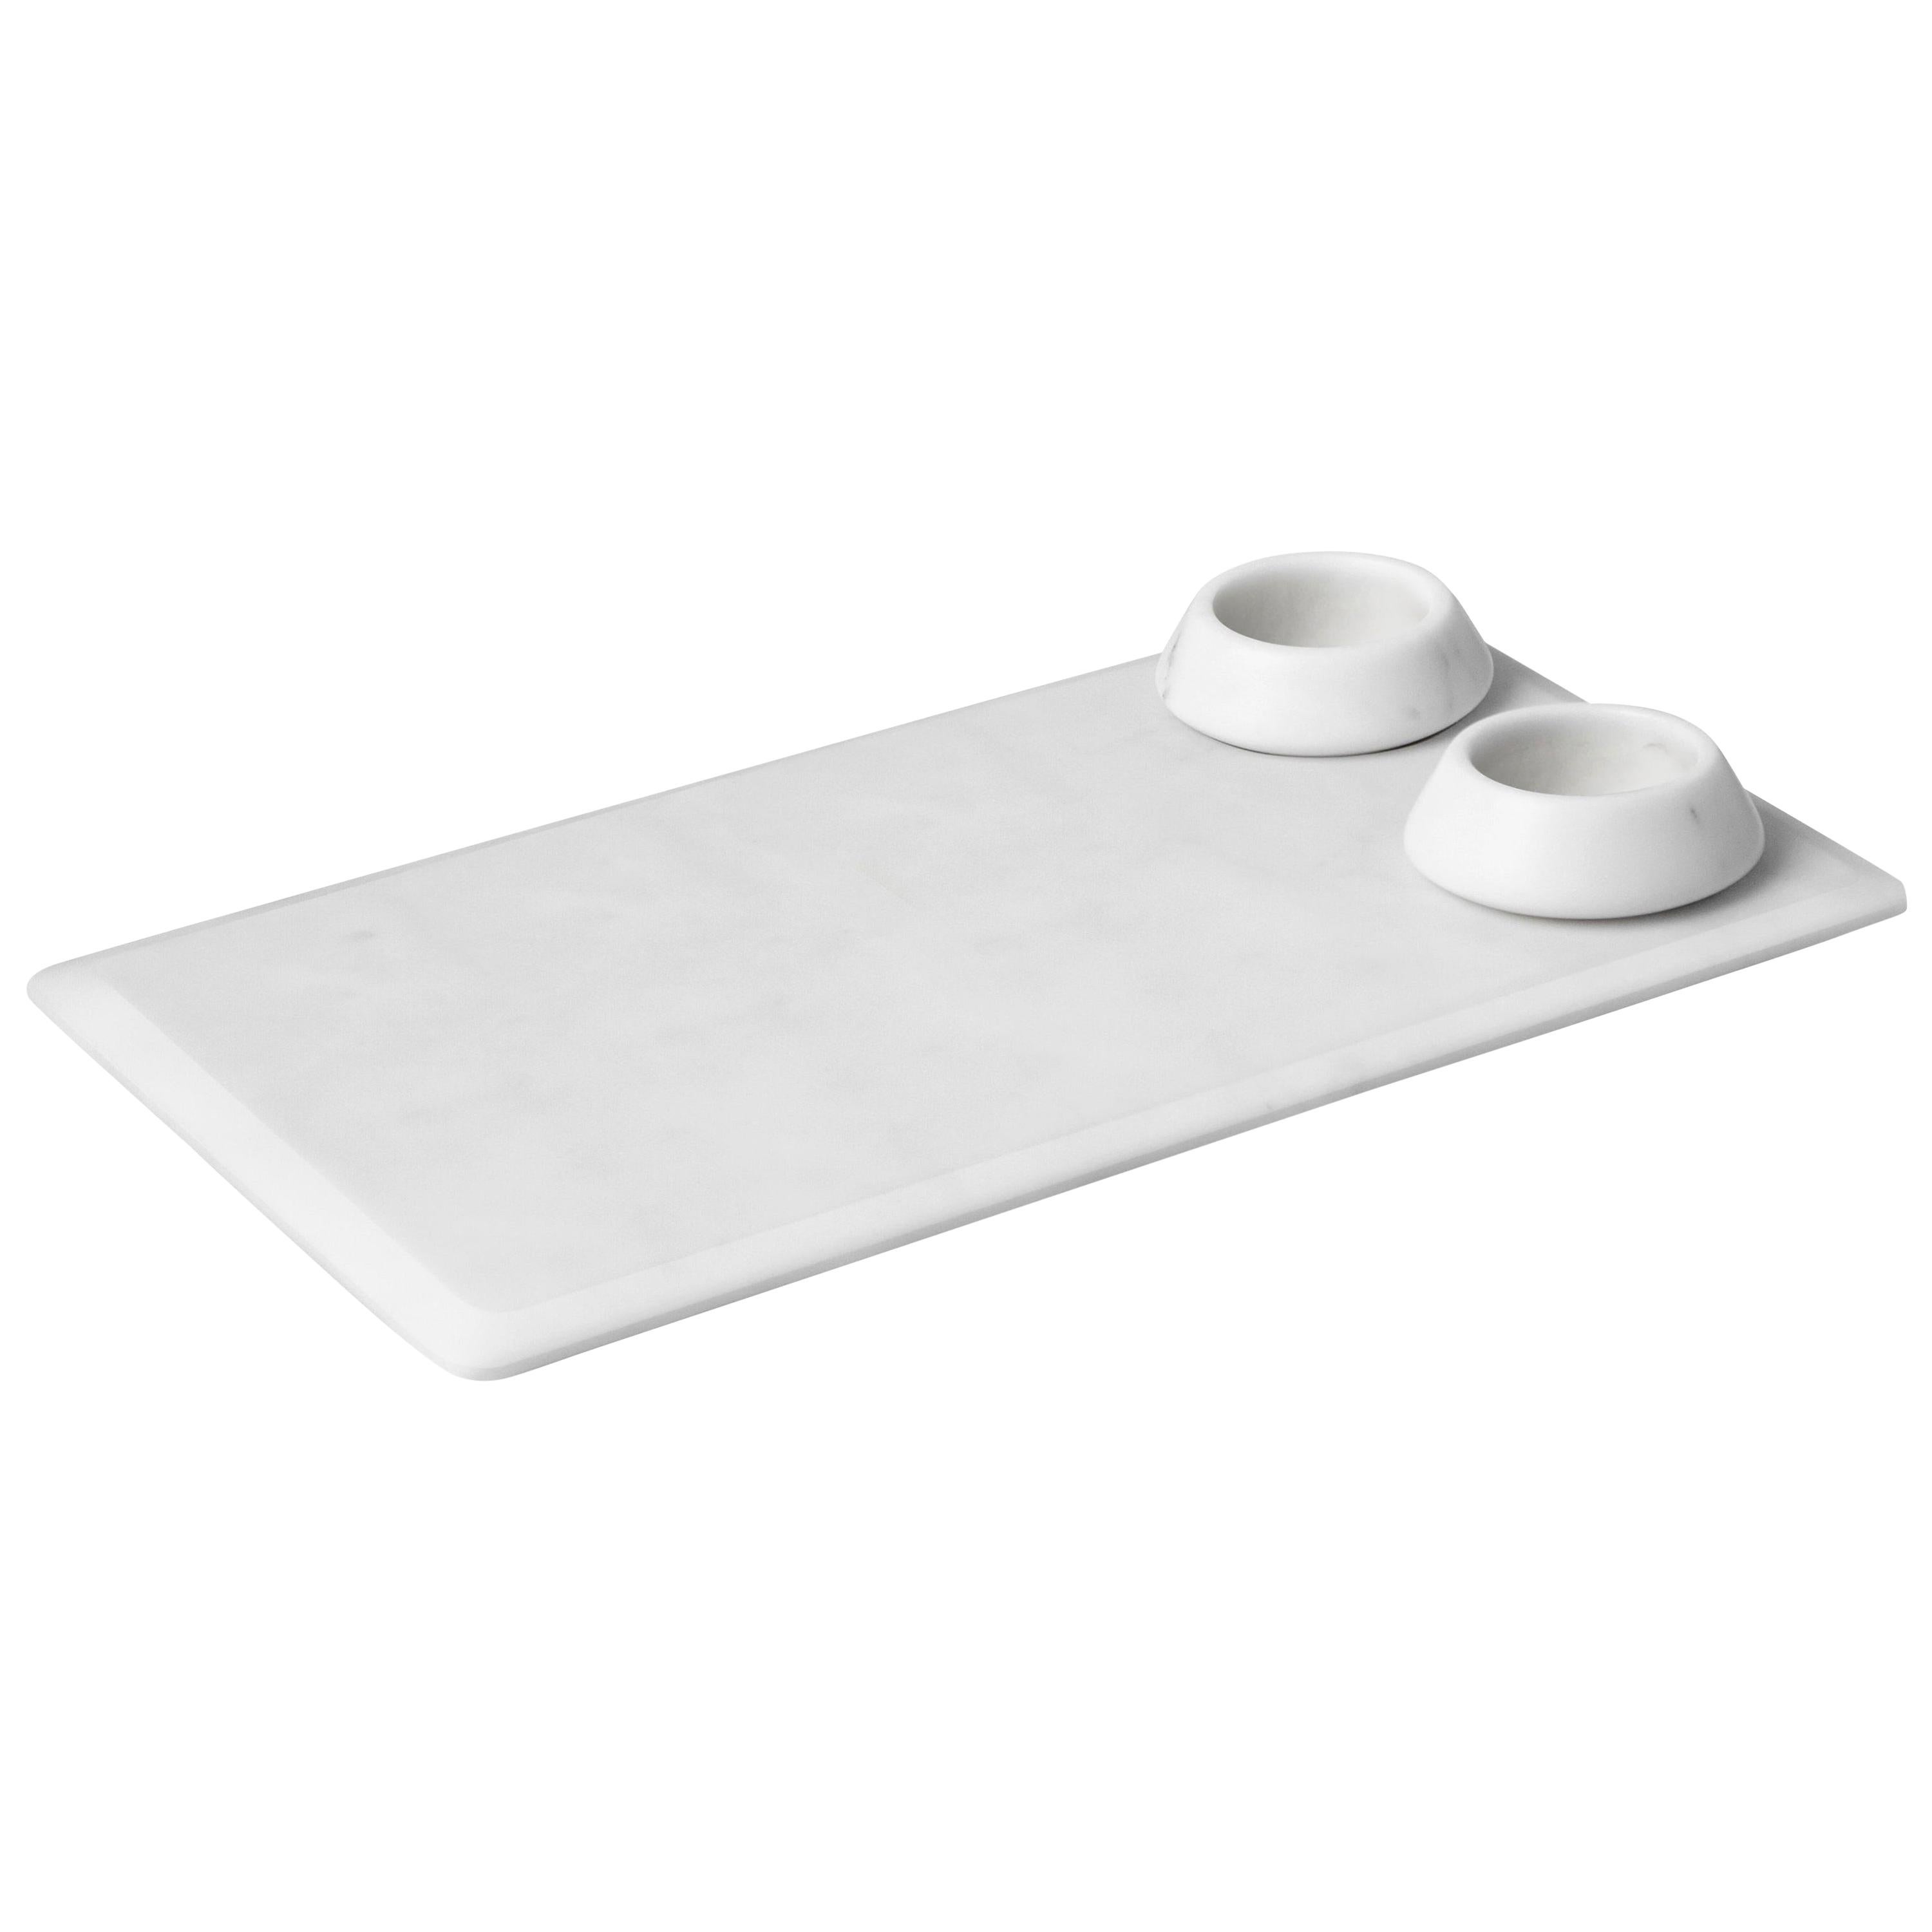 New modern Serving Platter with Bowls in white Marble Creator Colominas